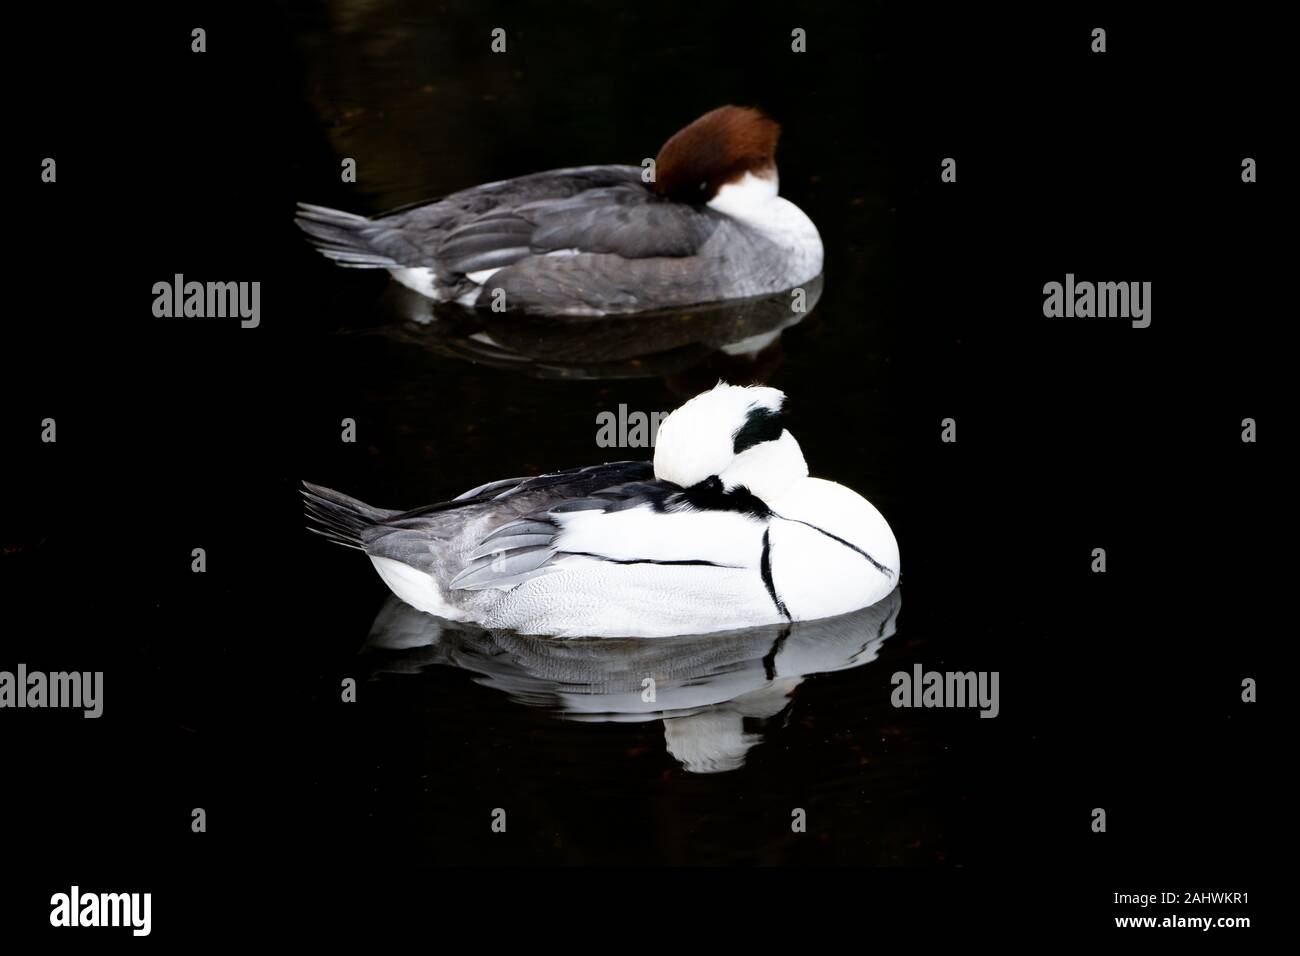 Pair of Smew (Mergus albellus) black and white ducks, male and female resting together on water with the same pose Stock Photo